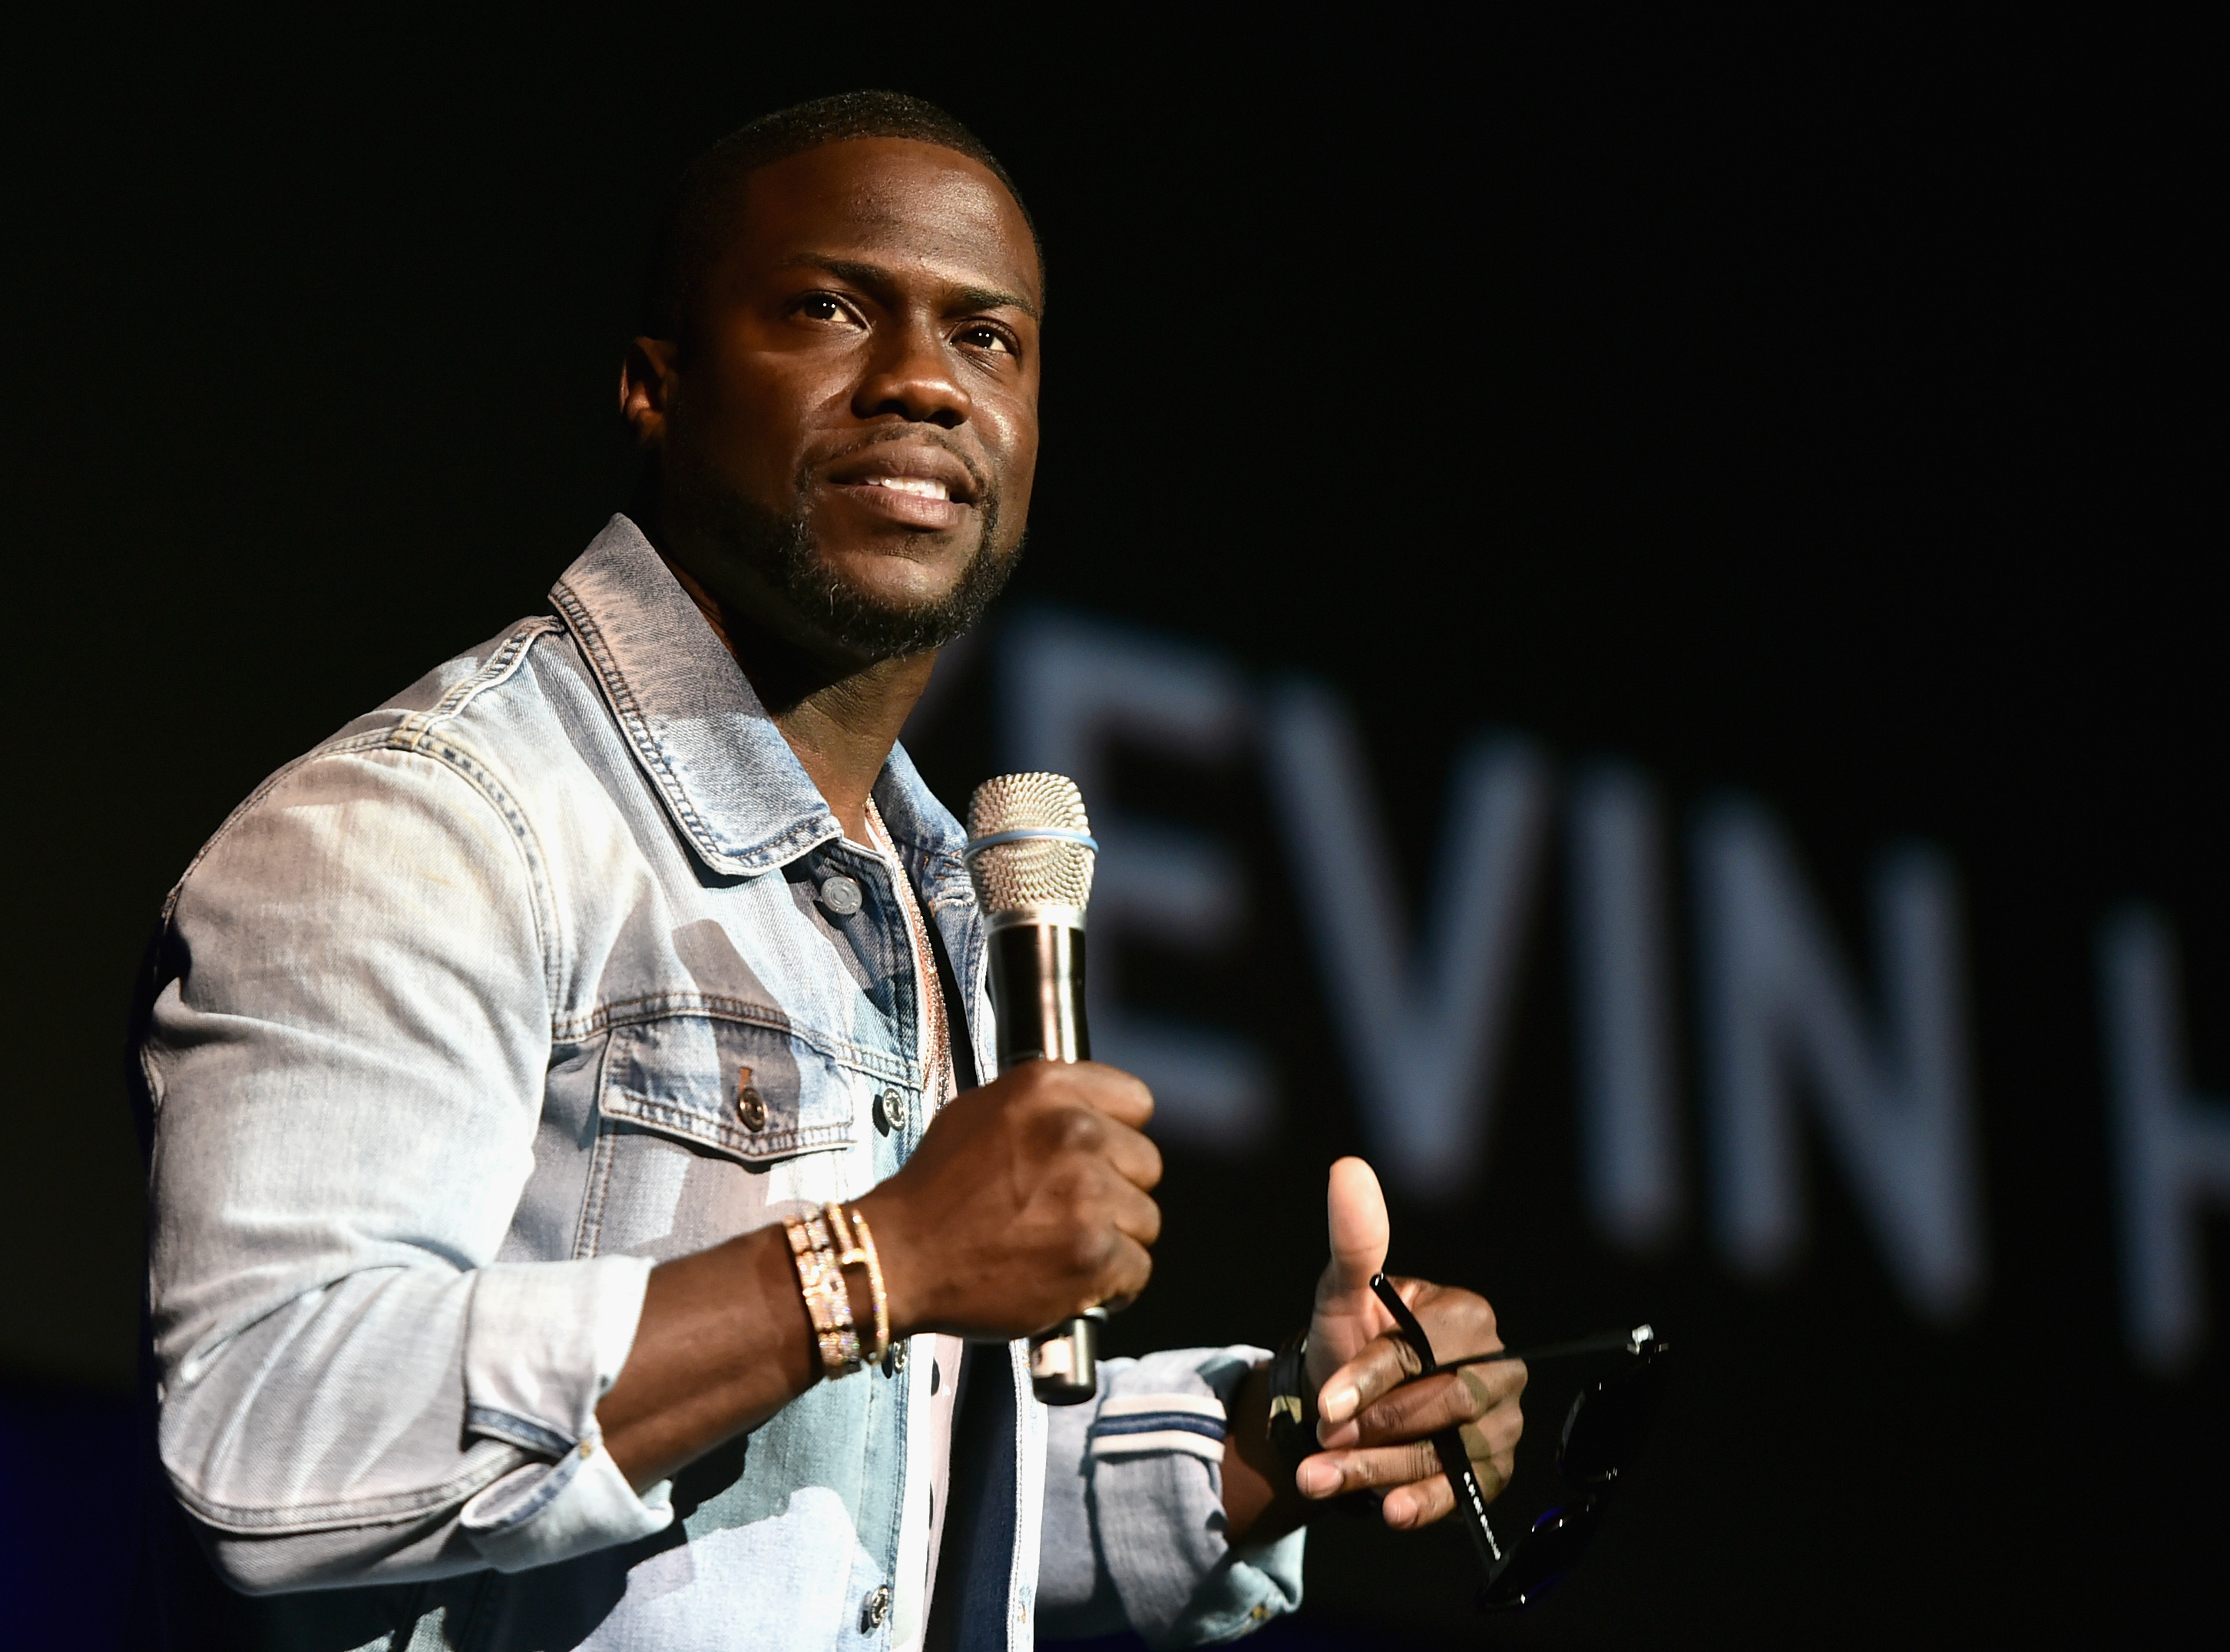 Watch Jay Z Pretend to Have a Friendly Chat With Kevin Hart for a Photo